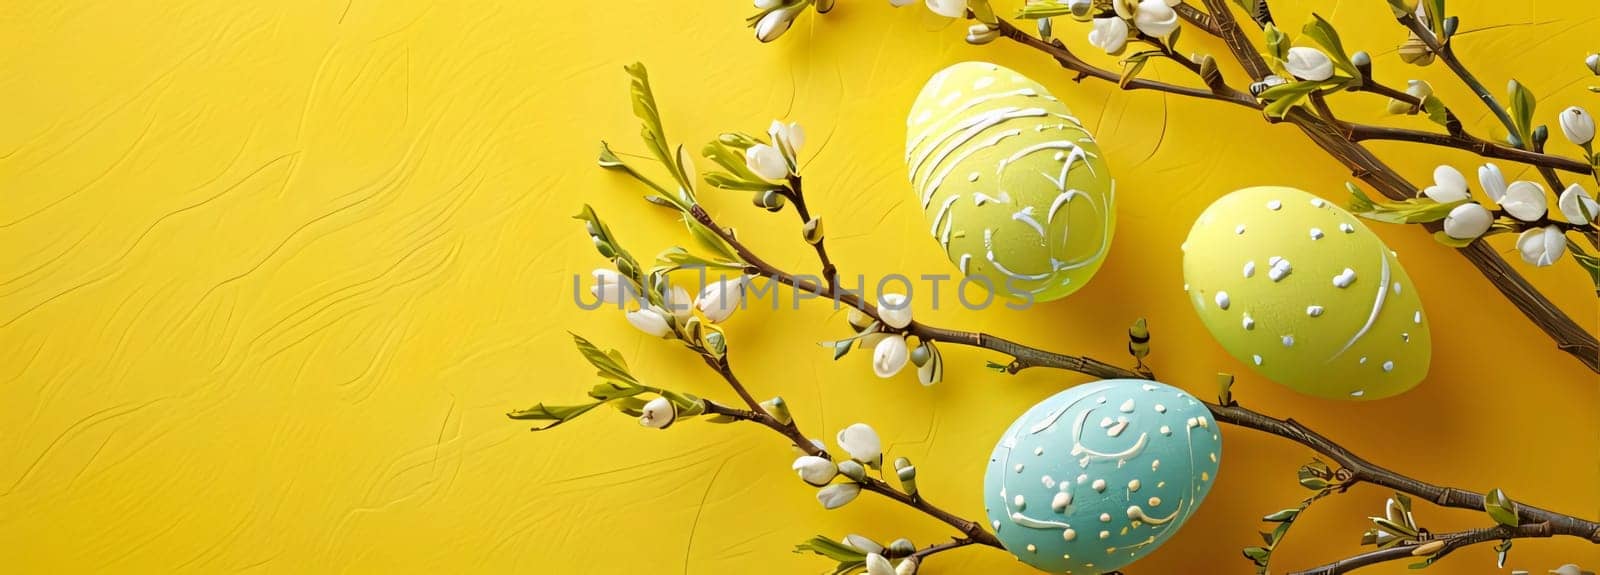 Feasts of the Lord's Resurrection: Easter eggs and spring flowers on yellow background with copy space.